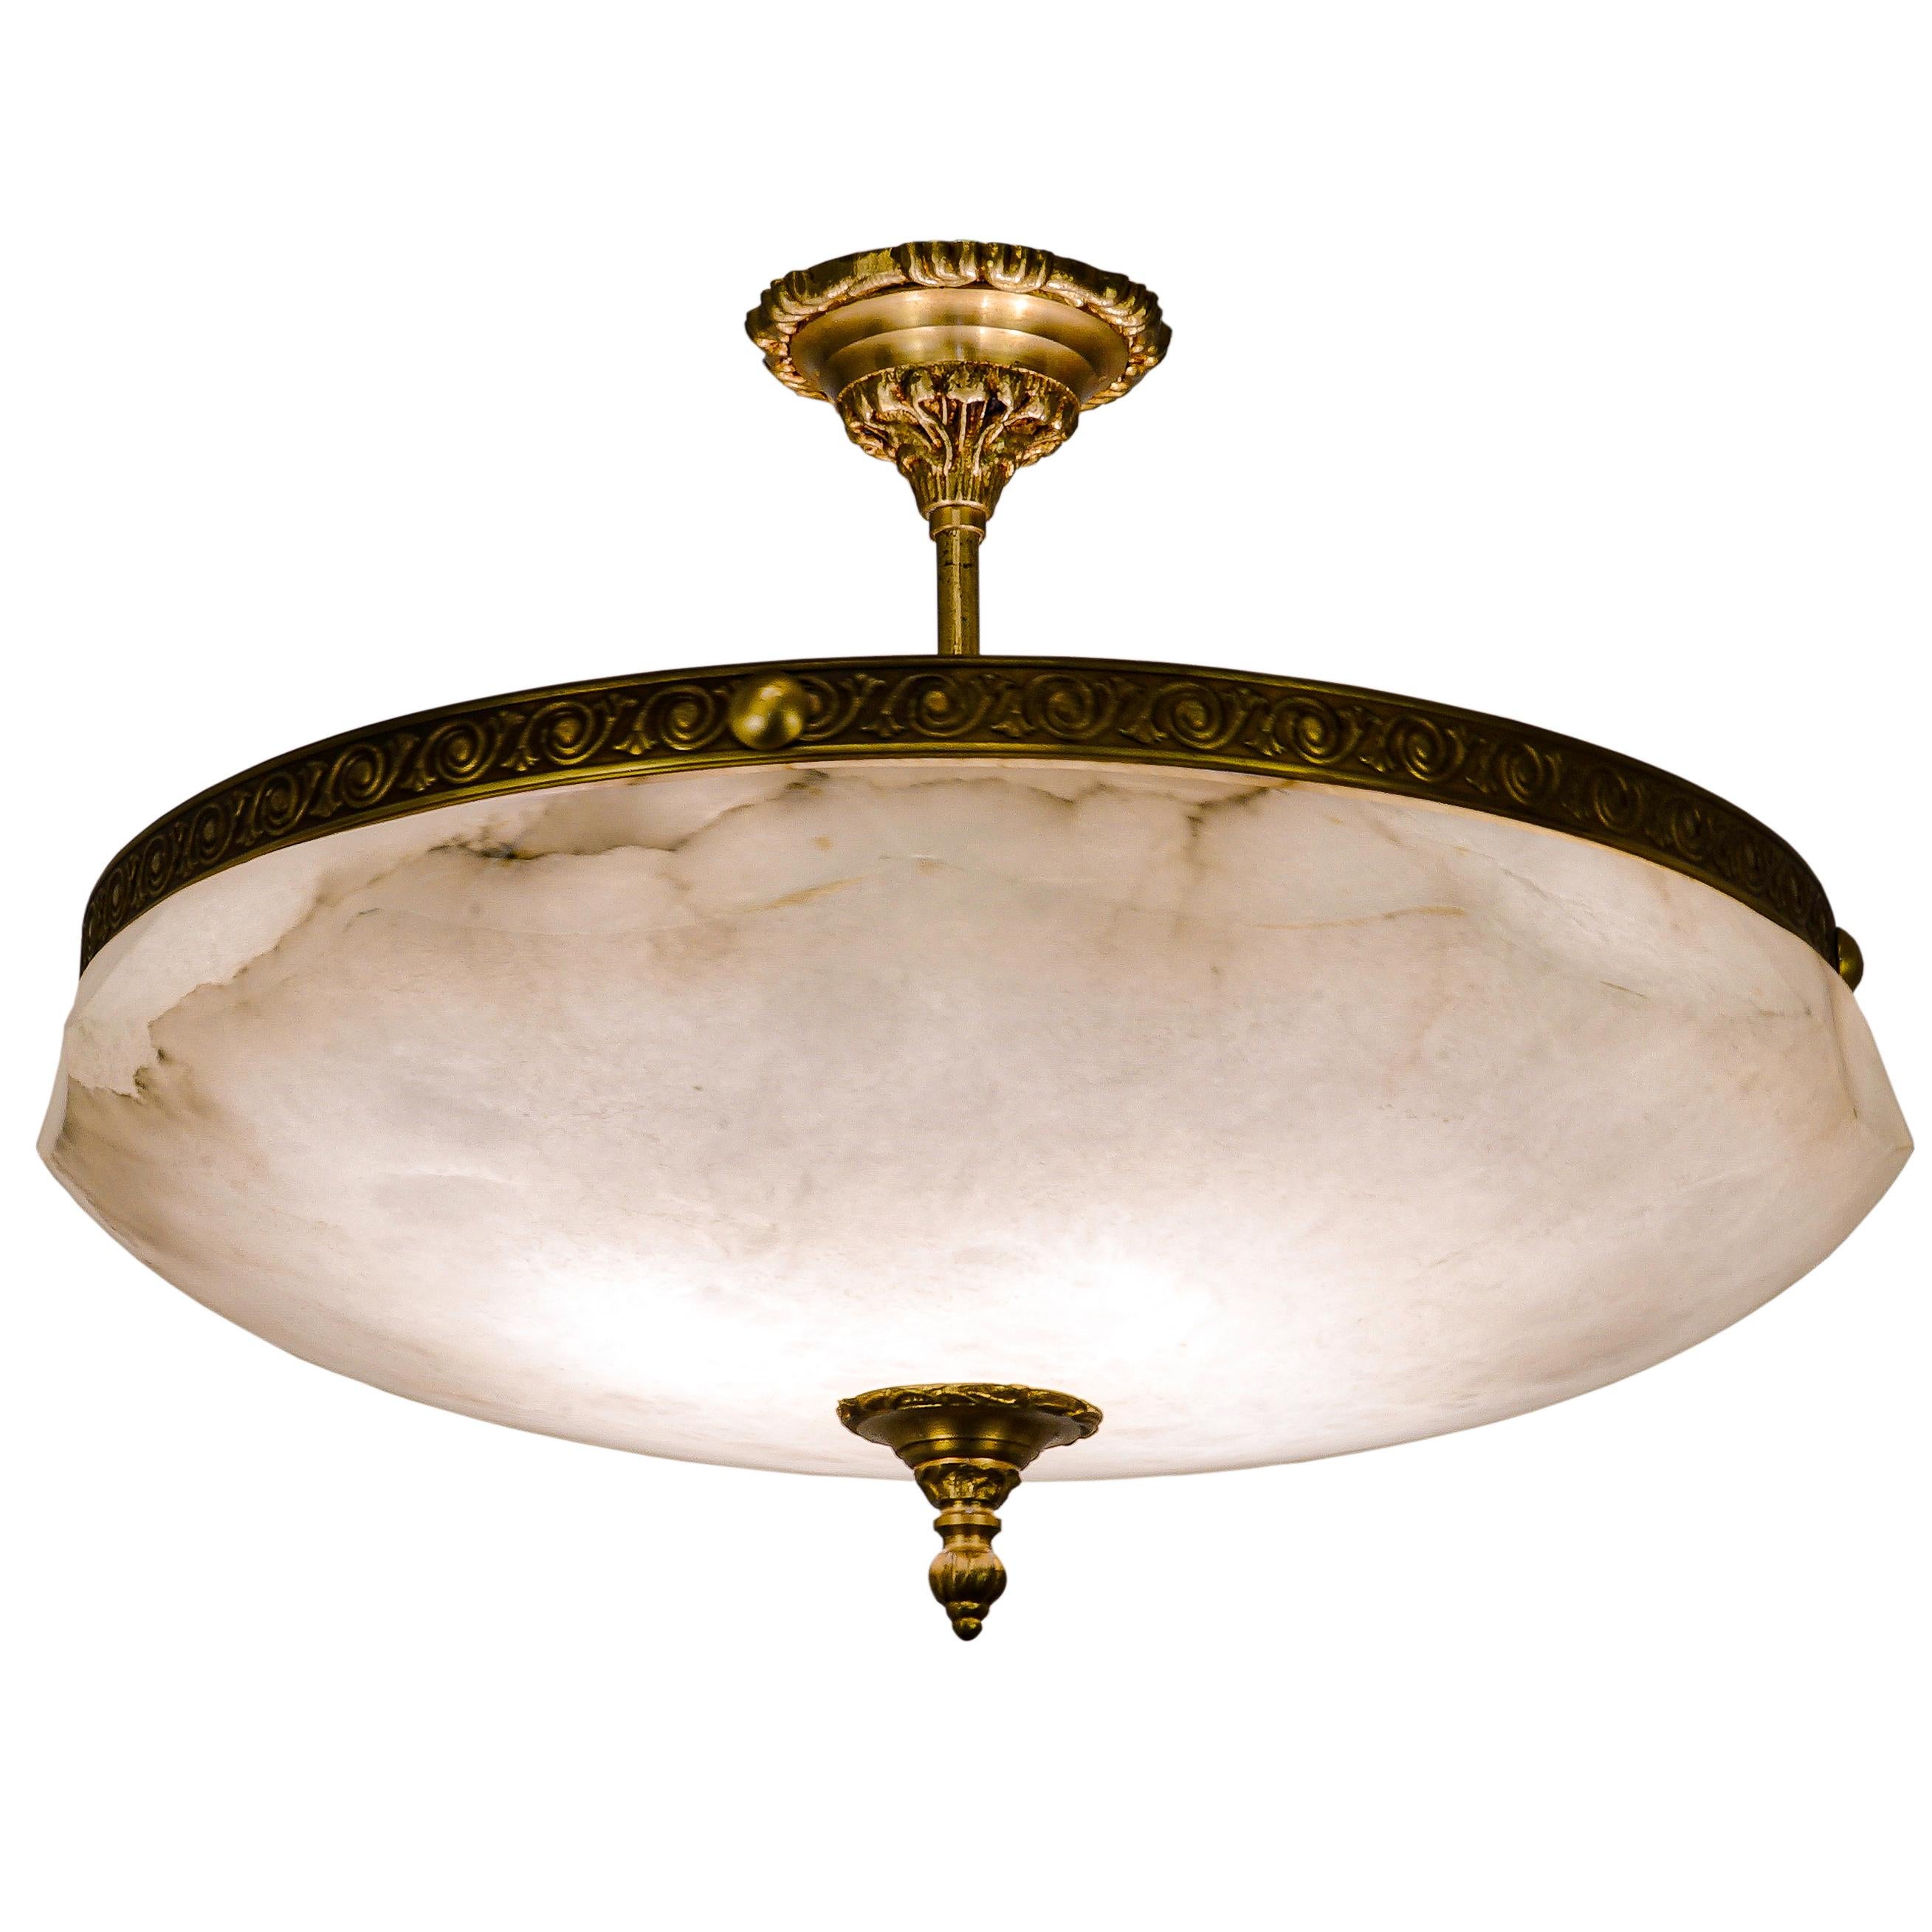 This elegant light may be mounted almost flush to the ceiling due to the central stem support and come complete with ceiling adapters for installation. An inward curving polygonal upper rim carved into bowl is neatly suspended by a gapless brass